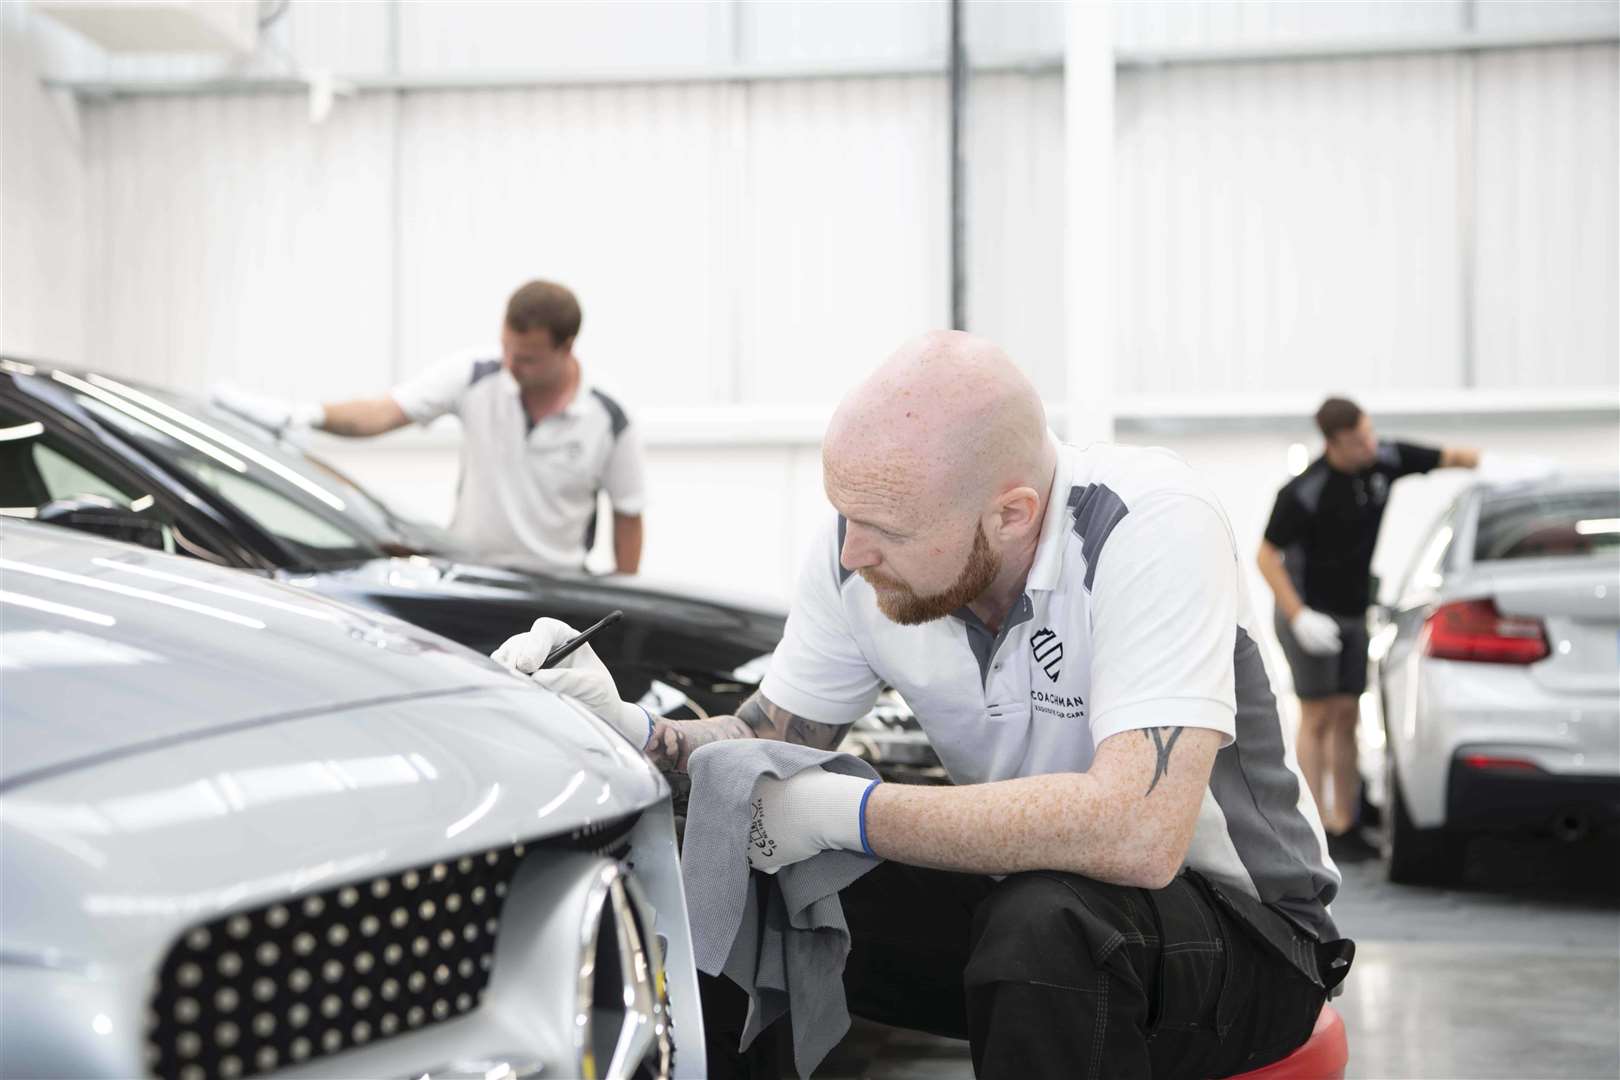 Your Coachman in Maidstone is the largest dedicated detailing facility in the county.